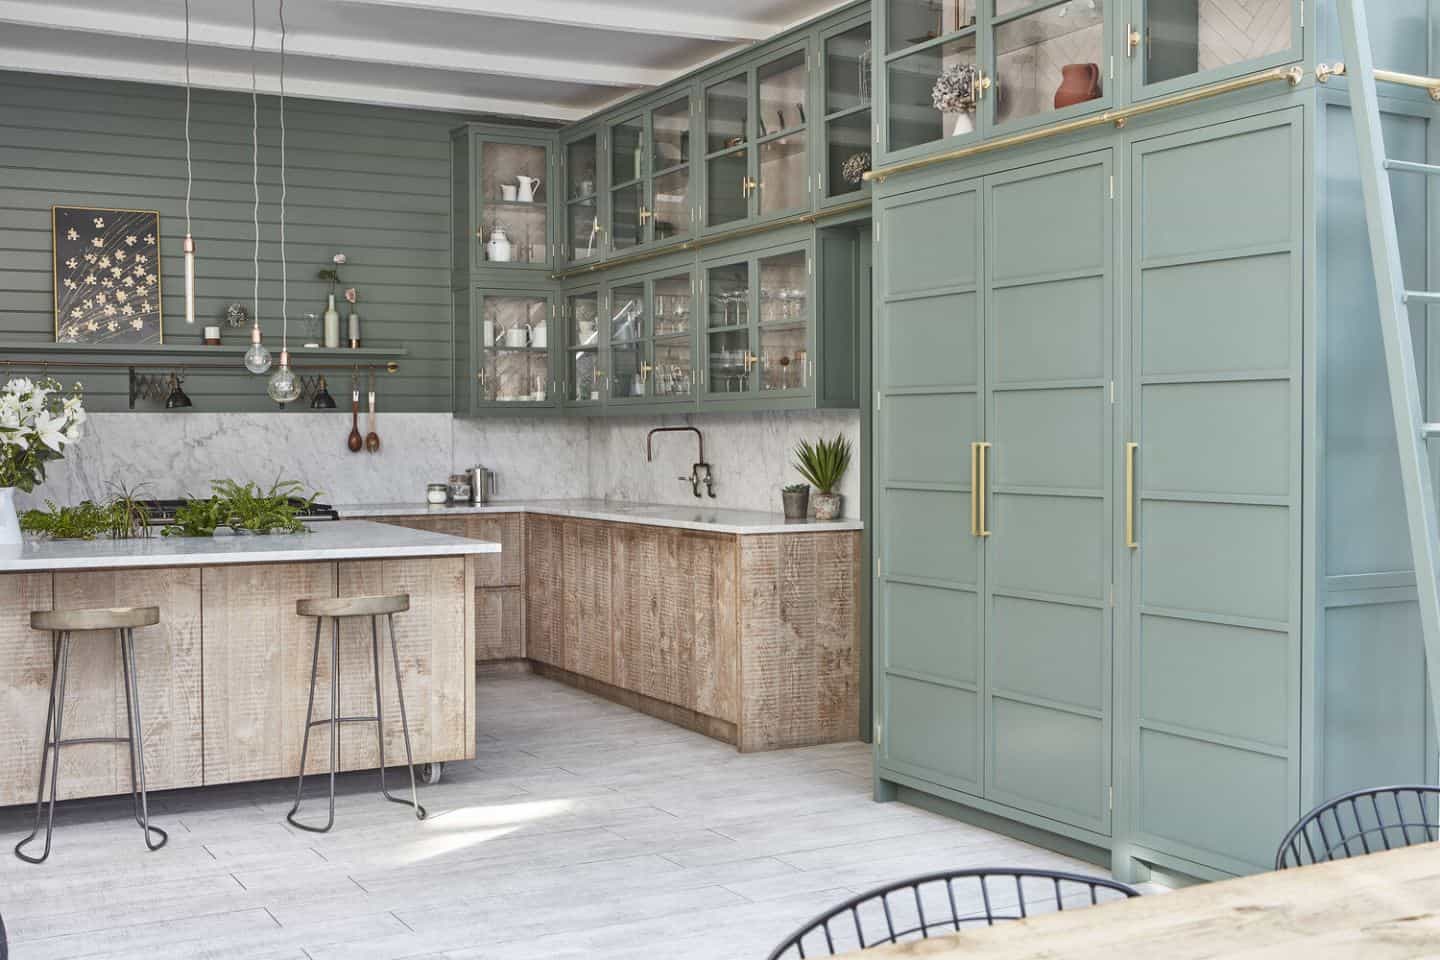 Urban Rustic Kitchens by Blakes London in a soft neo mint colour